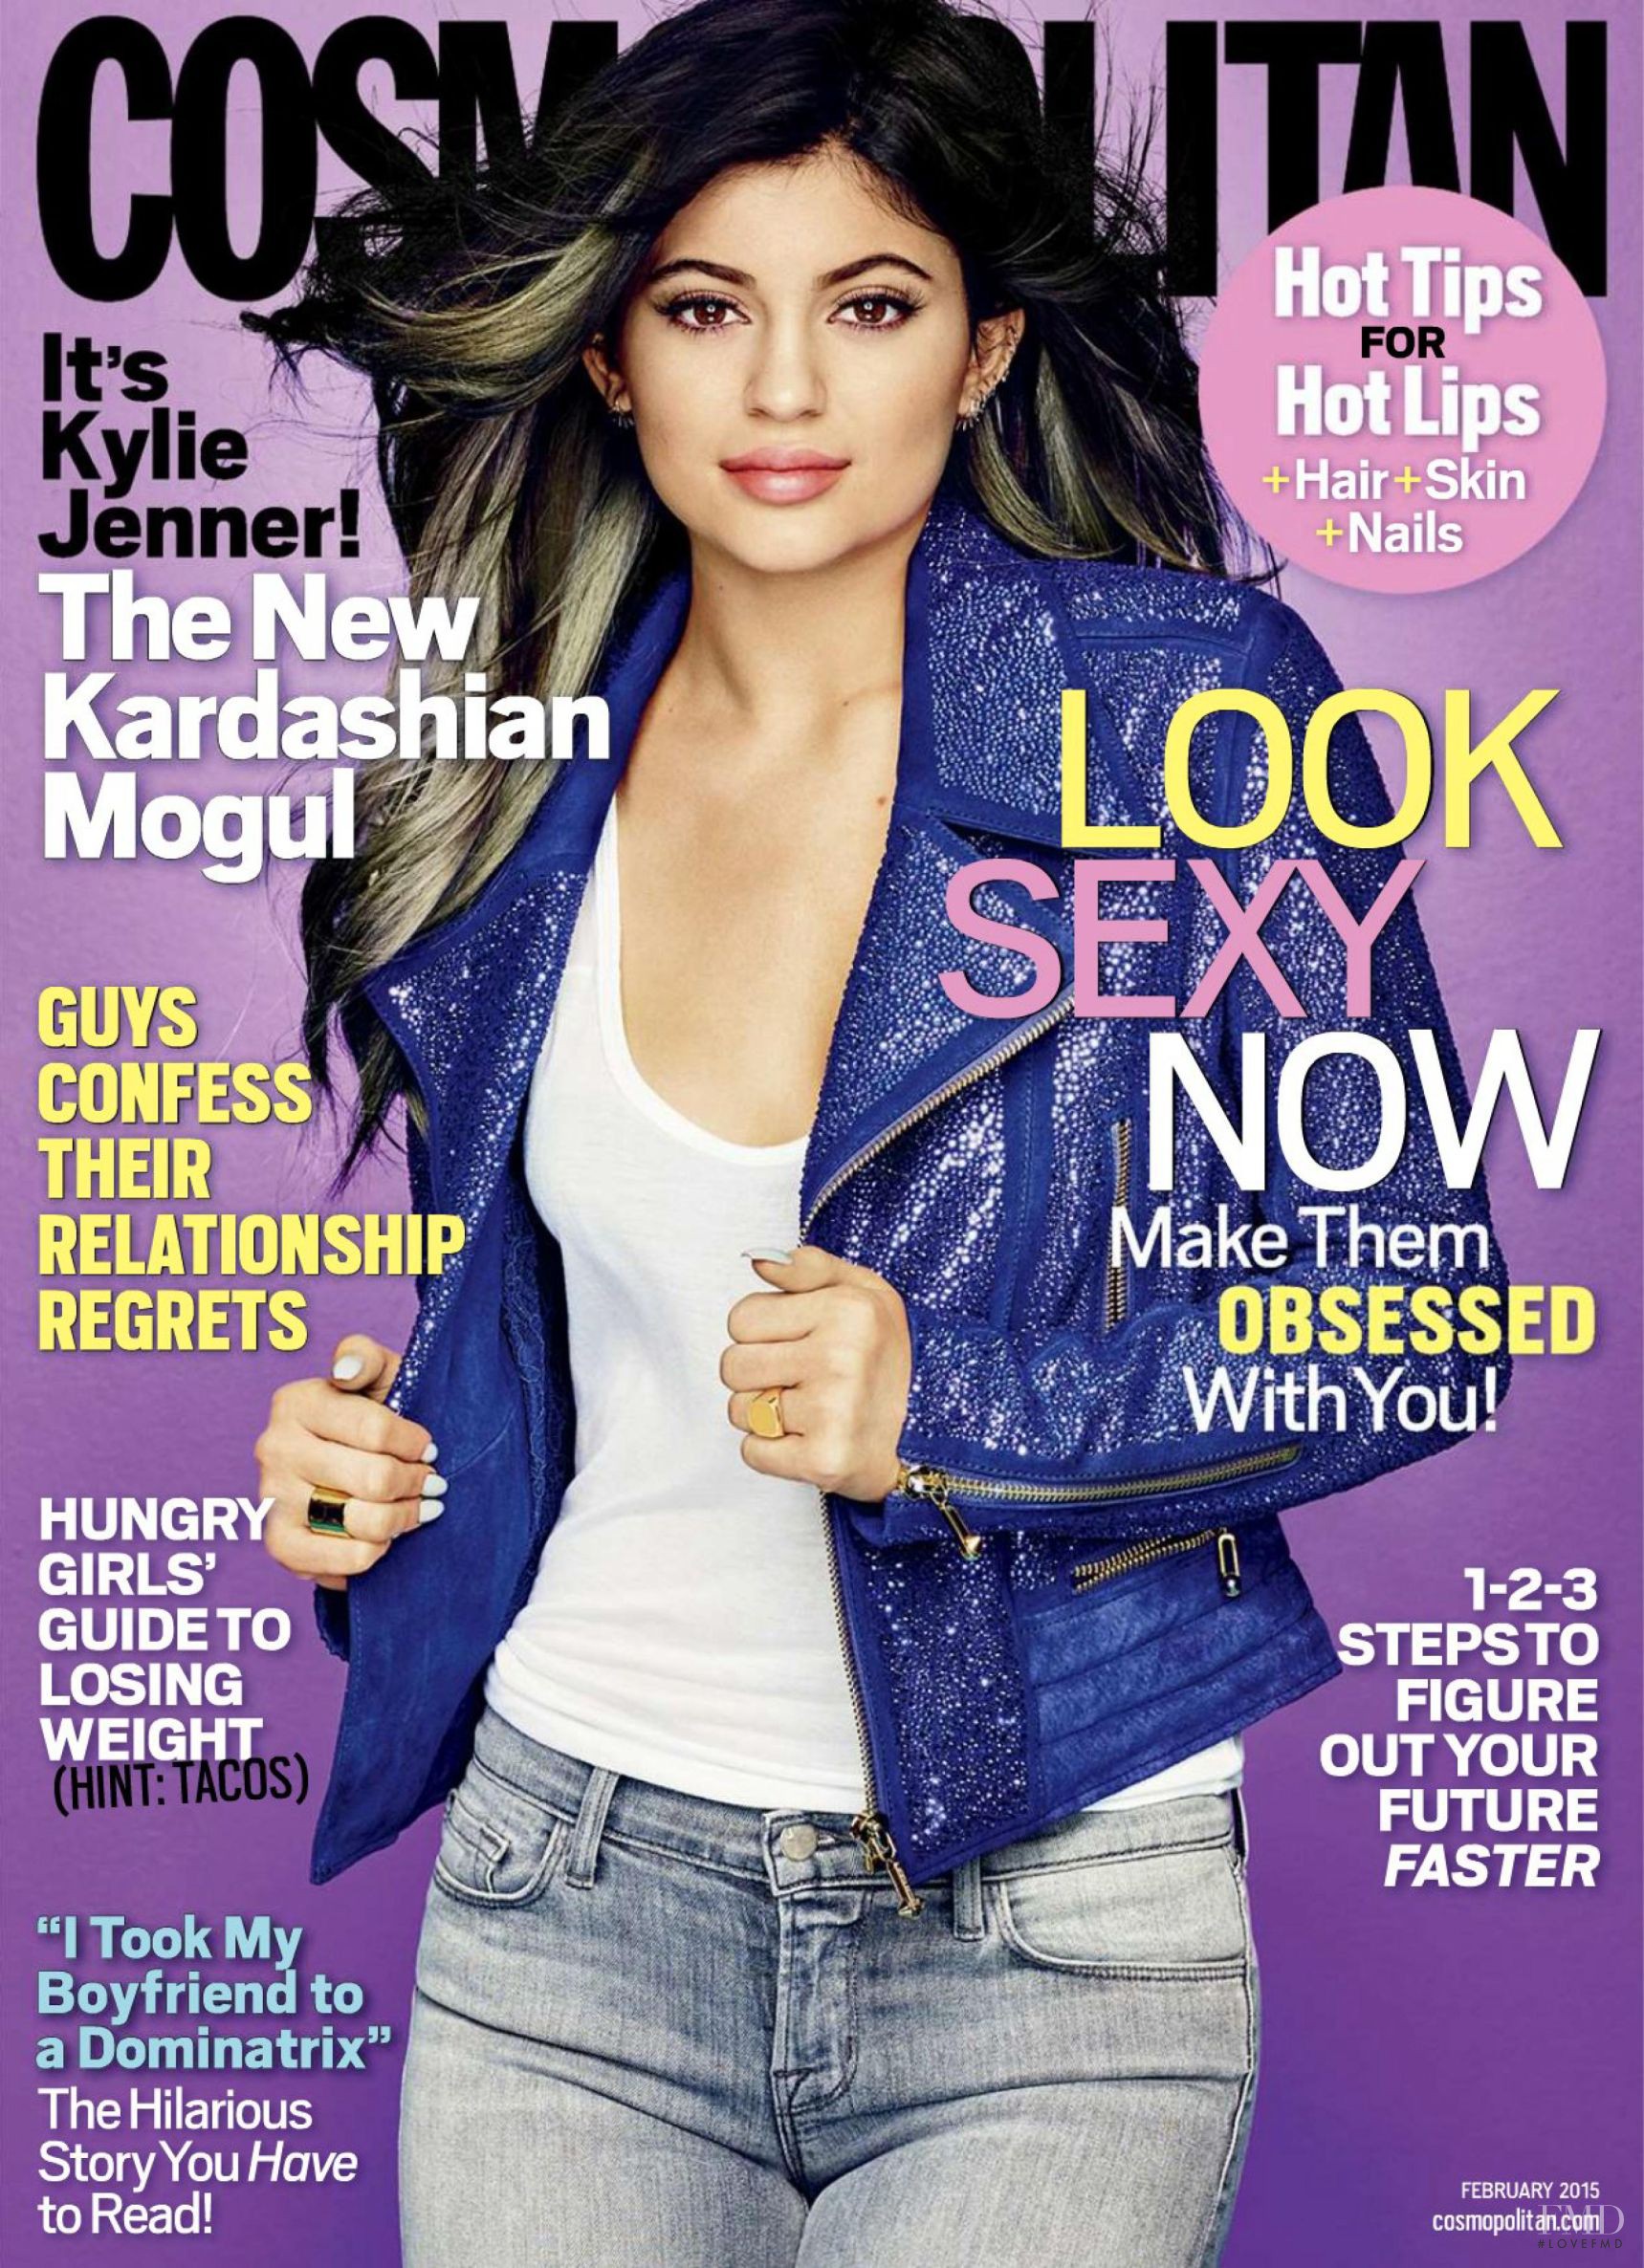 Cover of Cosmopolitan USA with Kylie Jenner, February 2015 (ID:38454 ...